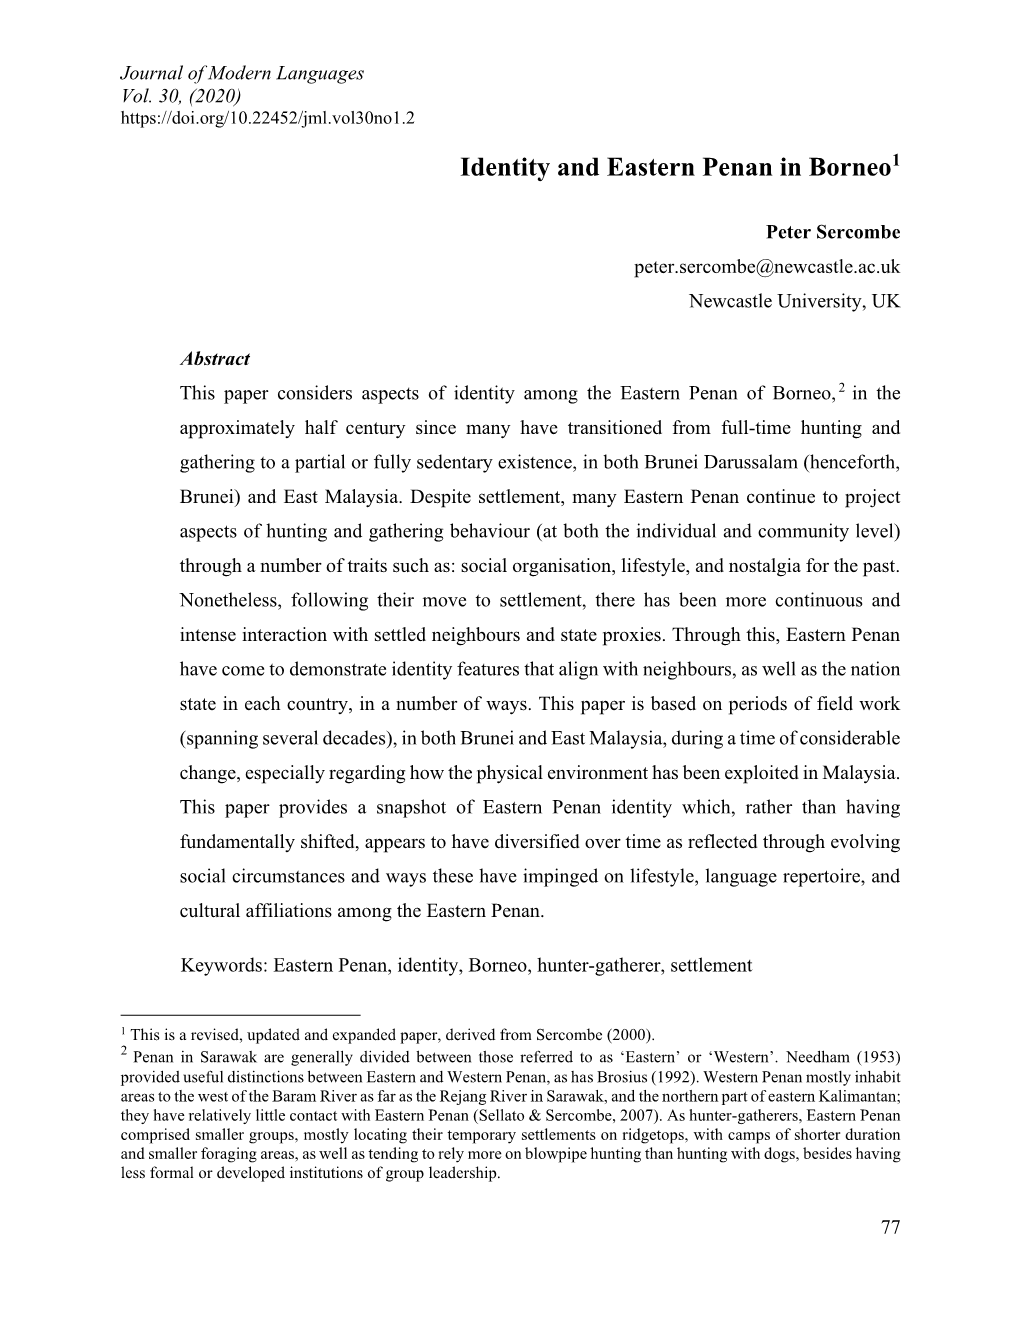 Identity and Eastern Penan in Borneo1